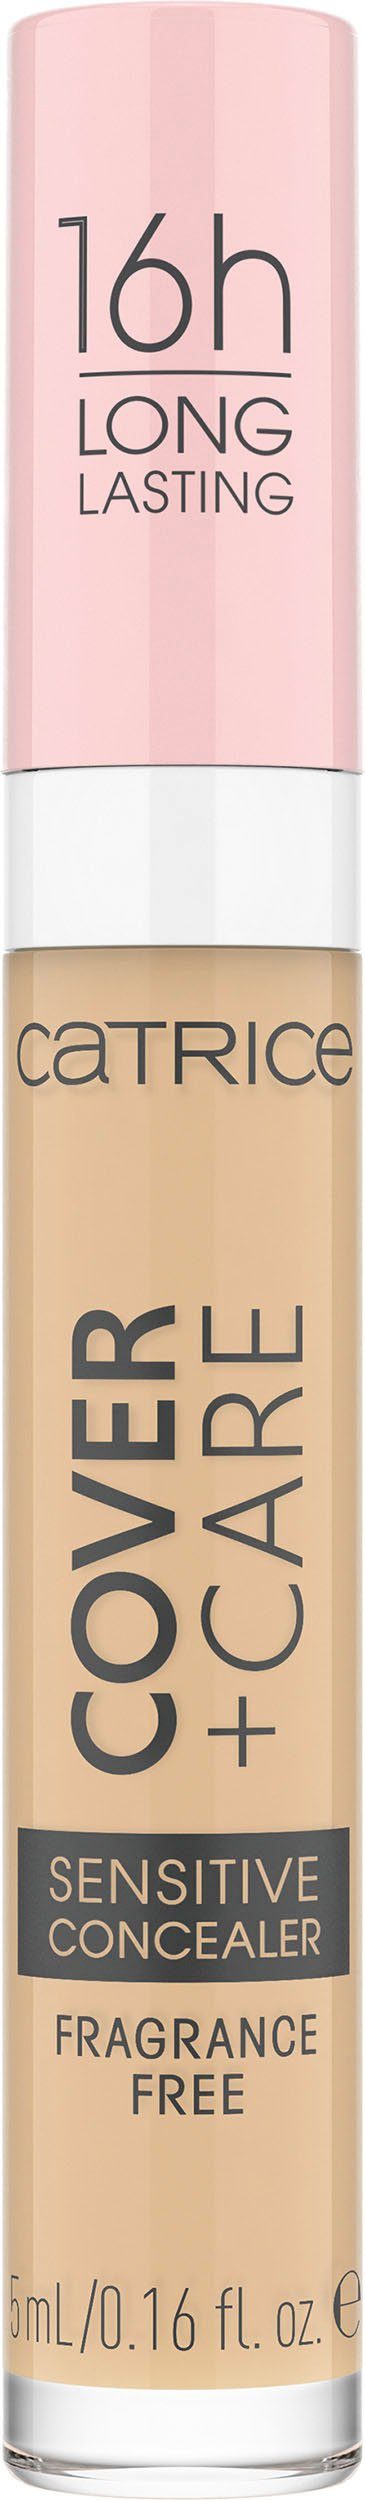 008W Catrice 3-tlg. Concealer, Care Sensitive + nude Cover Concealer Catrice